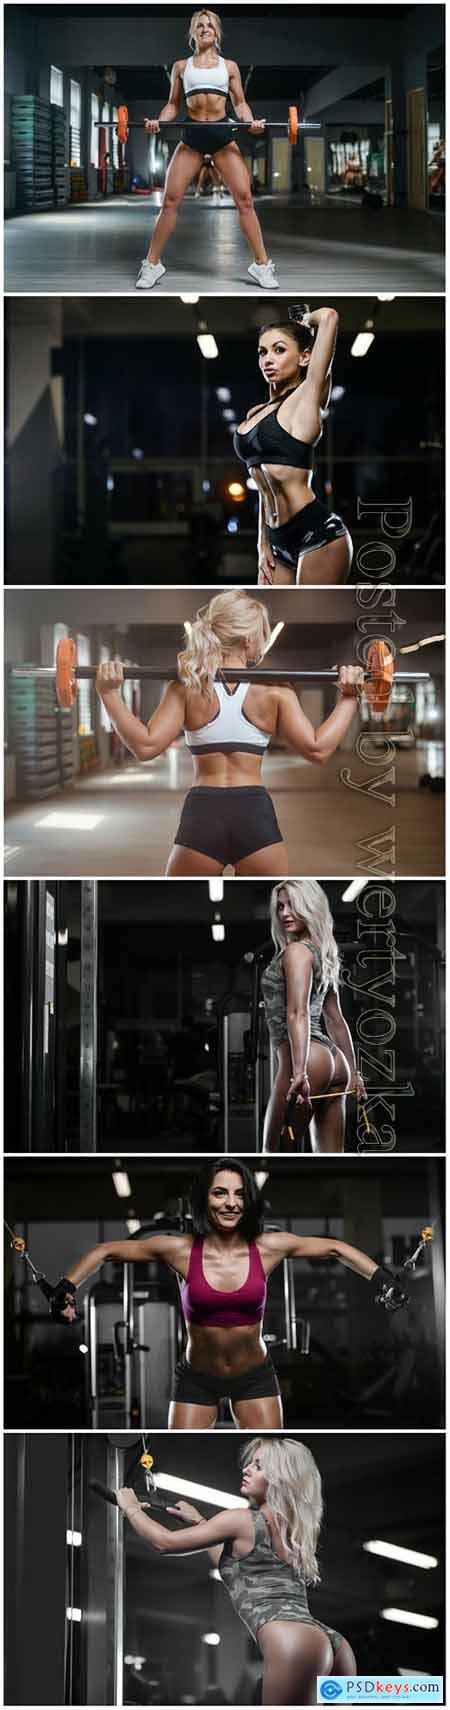 Girls in the gym, beauty and health